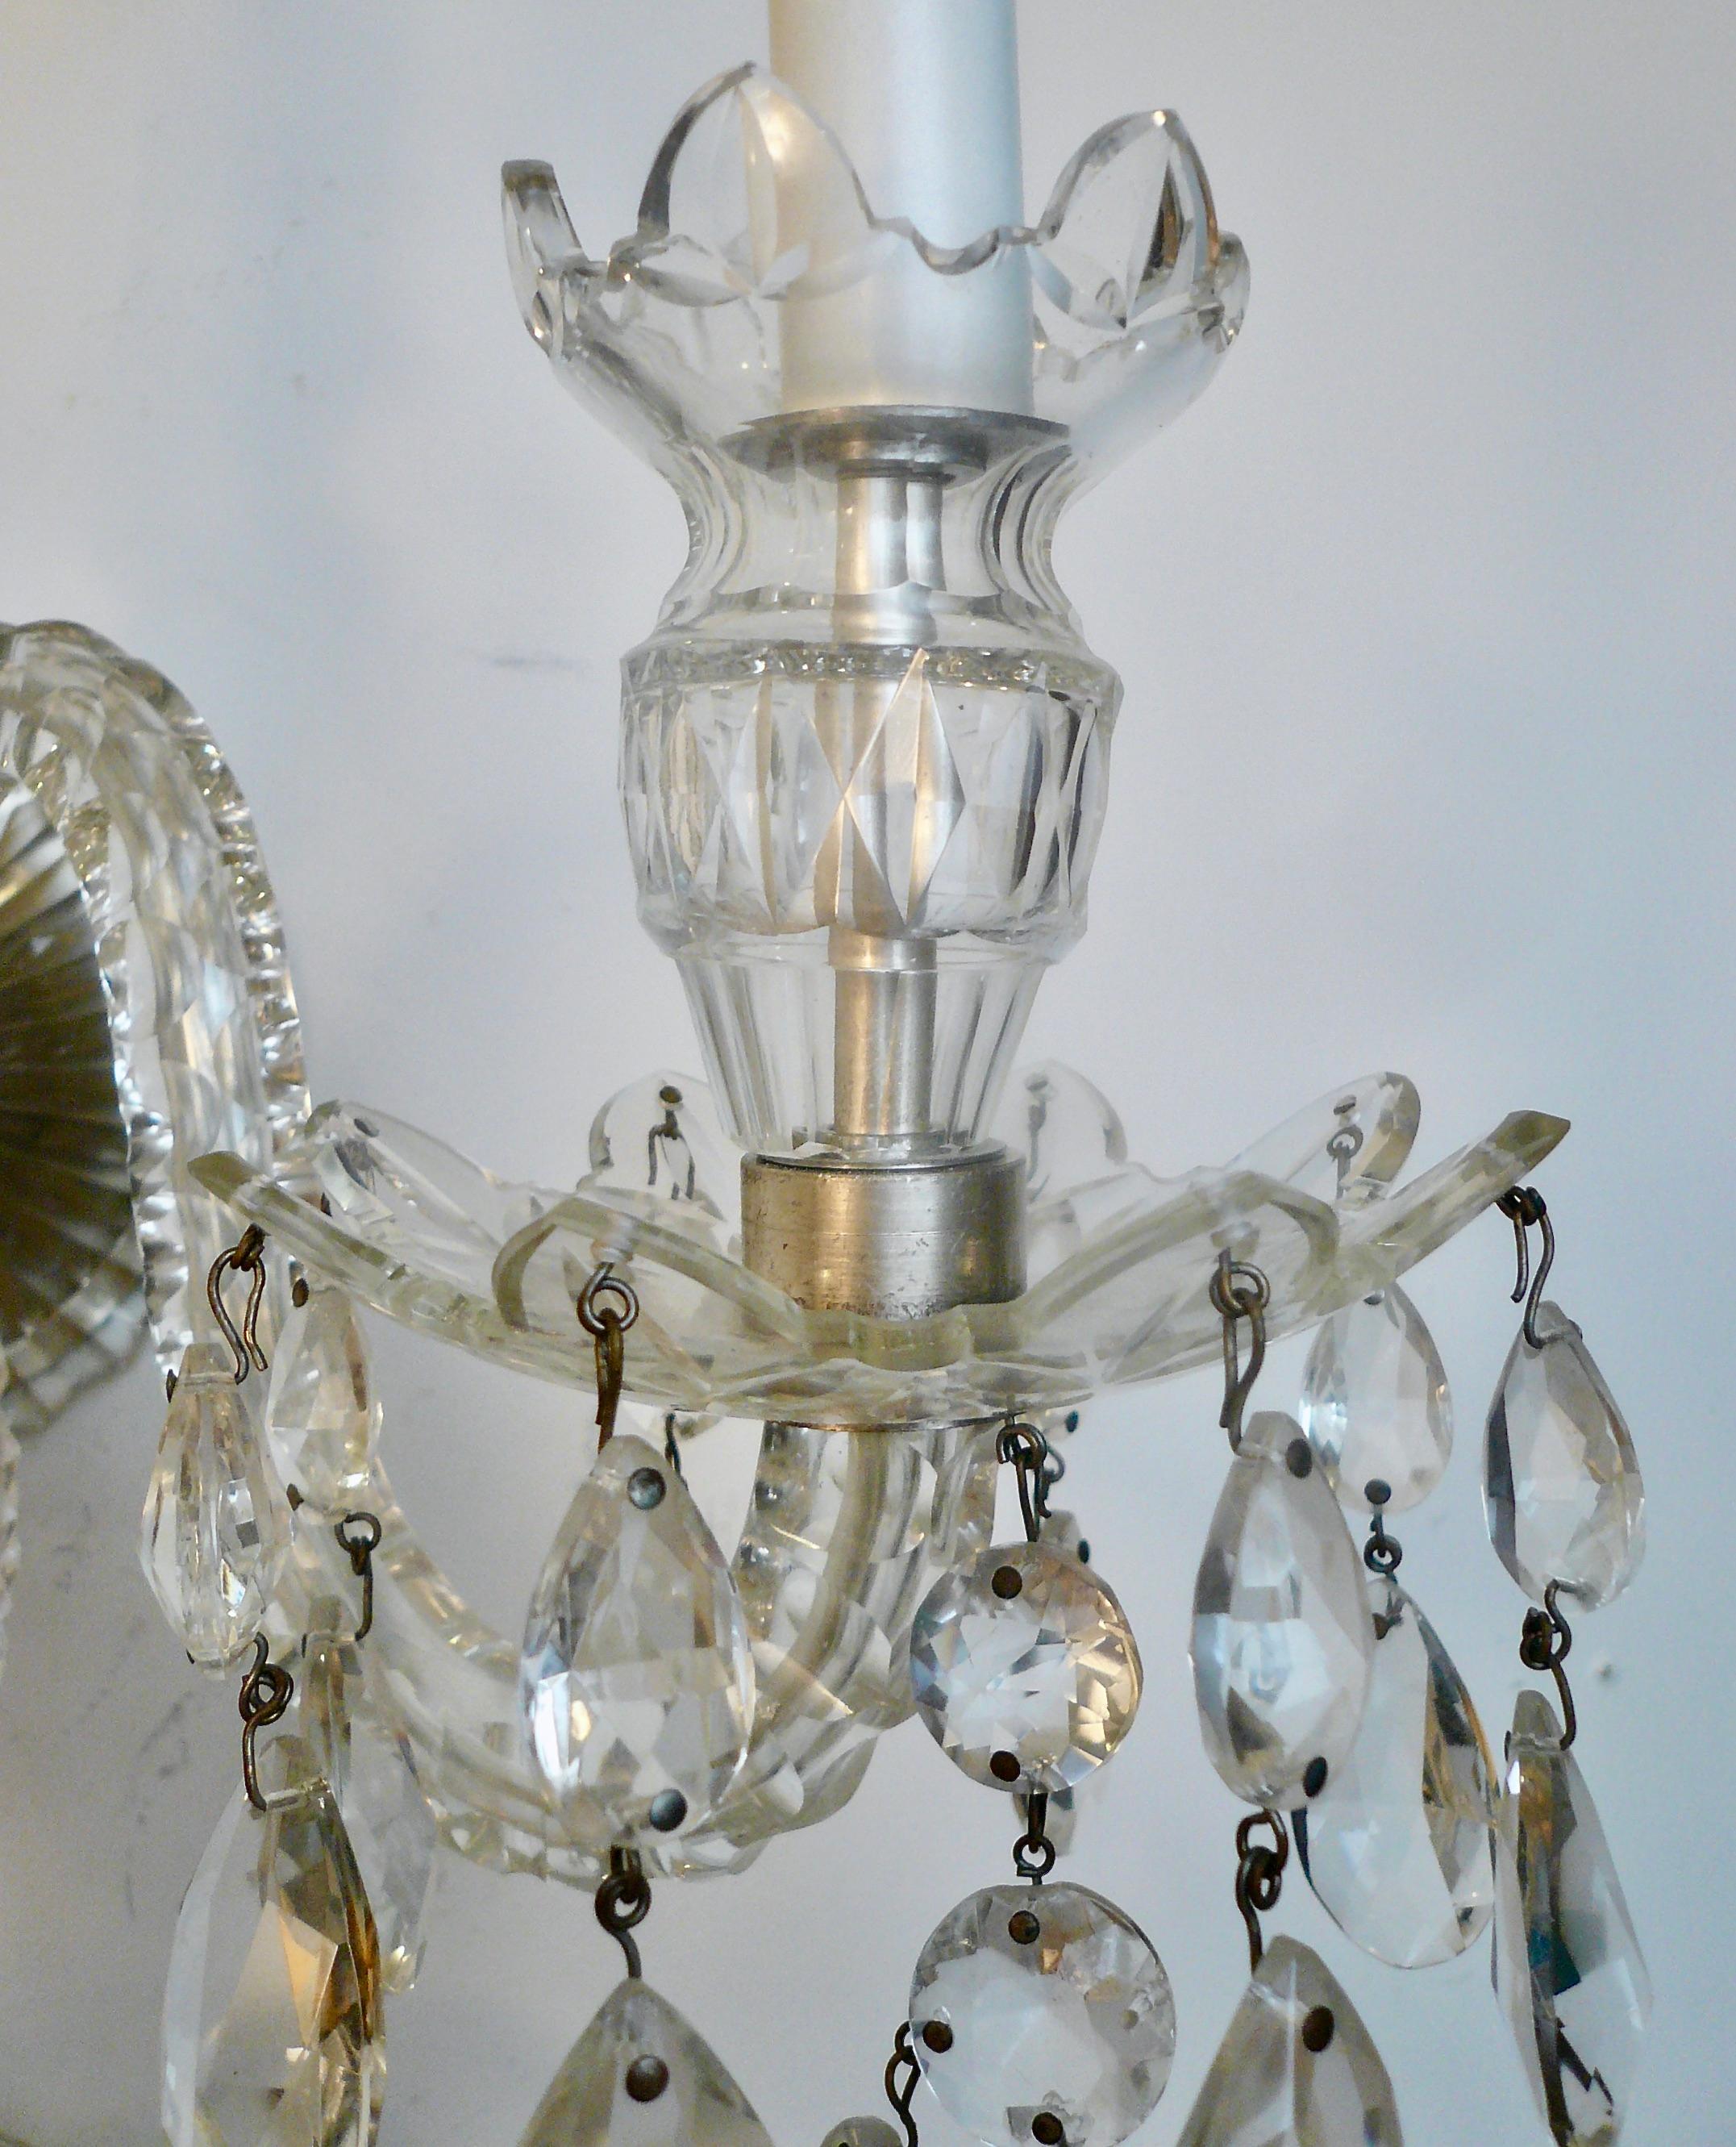 18th Century A Grand Scale Pair Cut Crystal Georgian Design Sconces in the Waterford Style For Sale